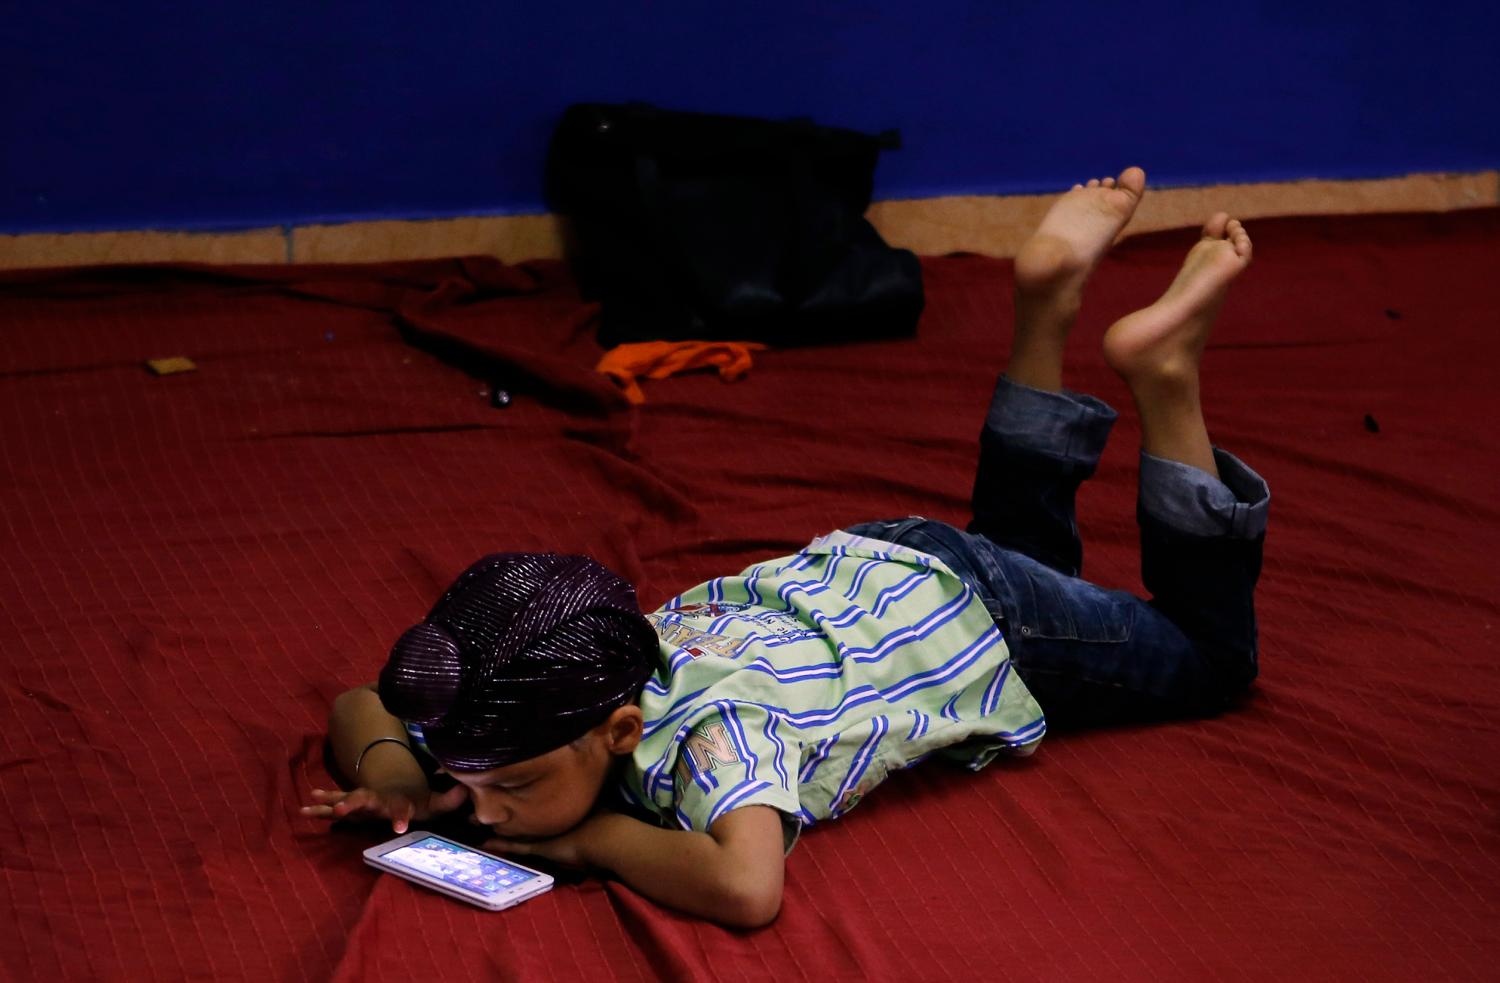 A young child plays with a smartphone